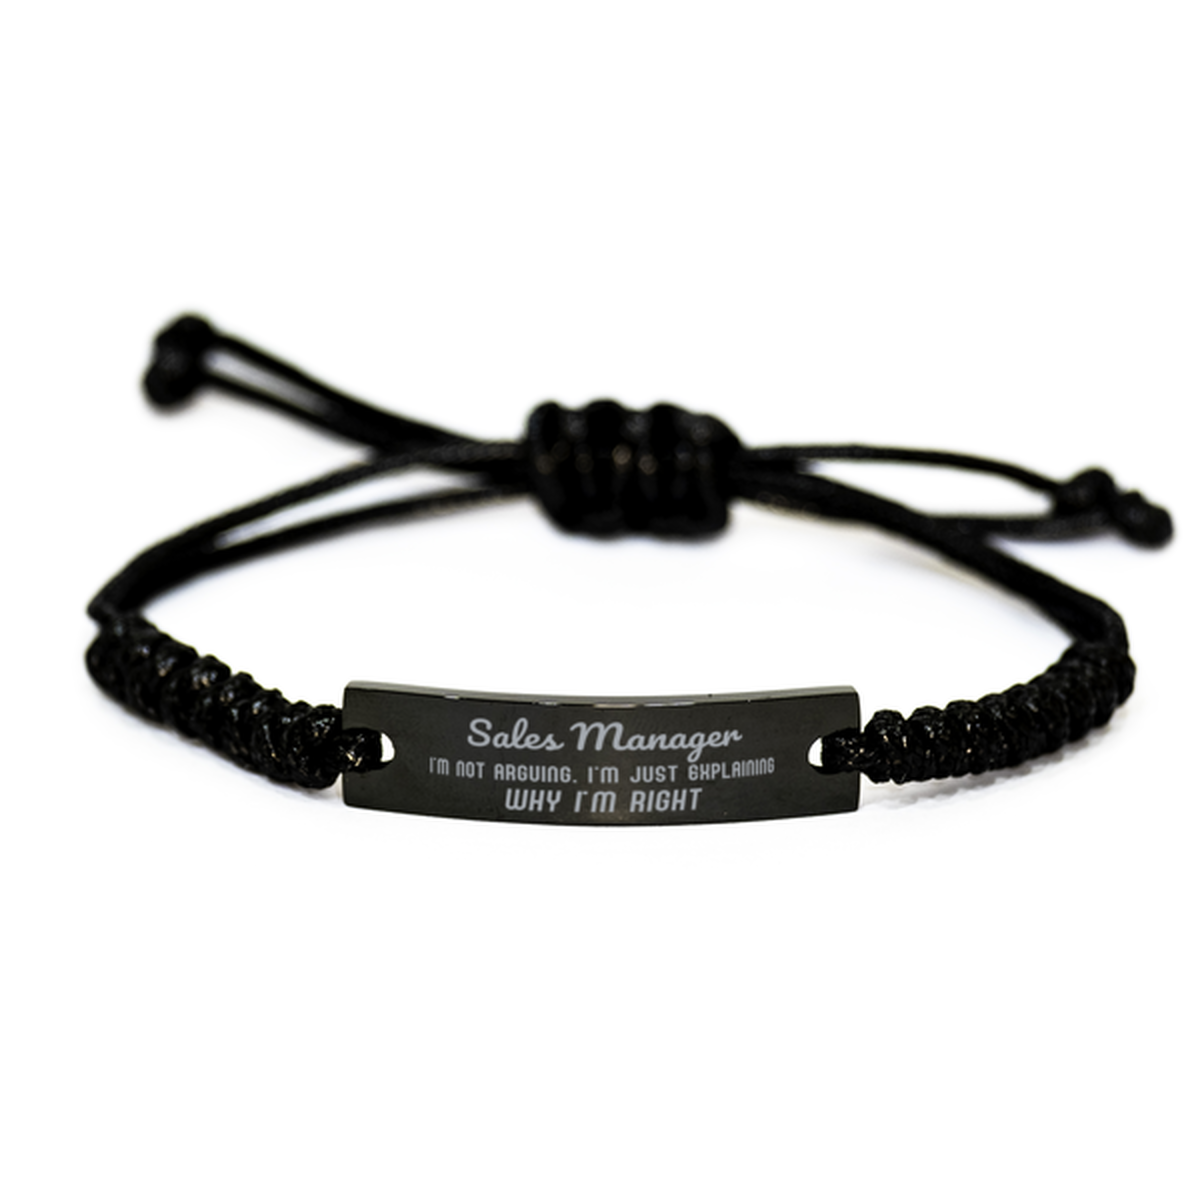 Sales Manager I'm not Arguing. I'm Just Explaining Why I'm RIGHT Black Rope Bracelet, Funny Saying Quote Sales Manager Gifts For Sales Manager Graduation Birthday Christmas Gifts for Men Women Coworker